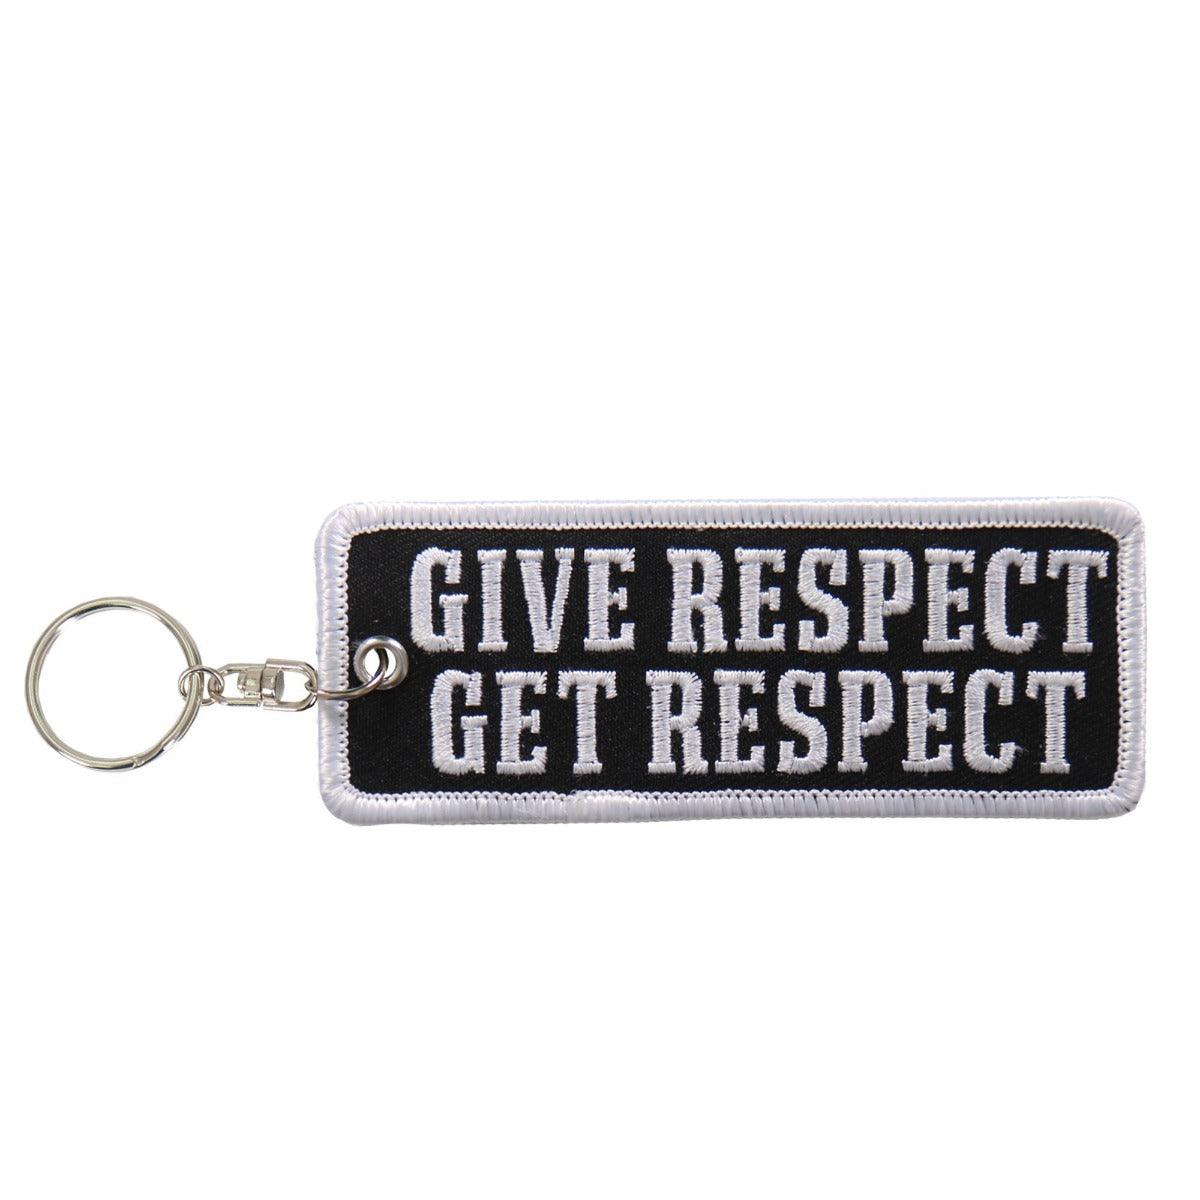 Hot Leathers Key Chain Patch Give Respect Get Respect - American Legend Rider